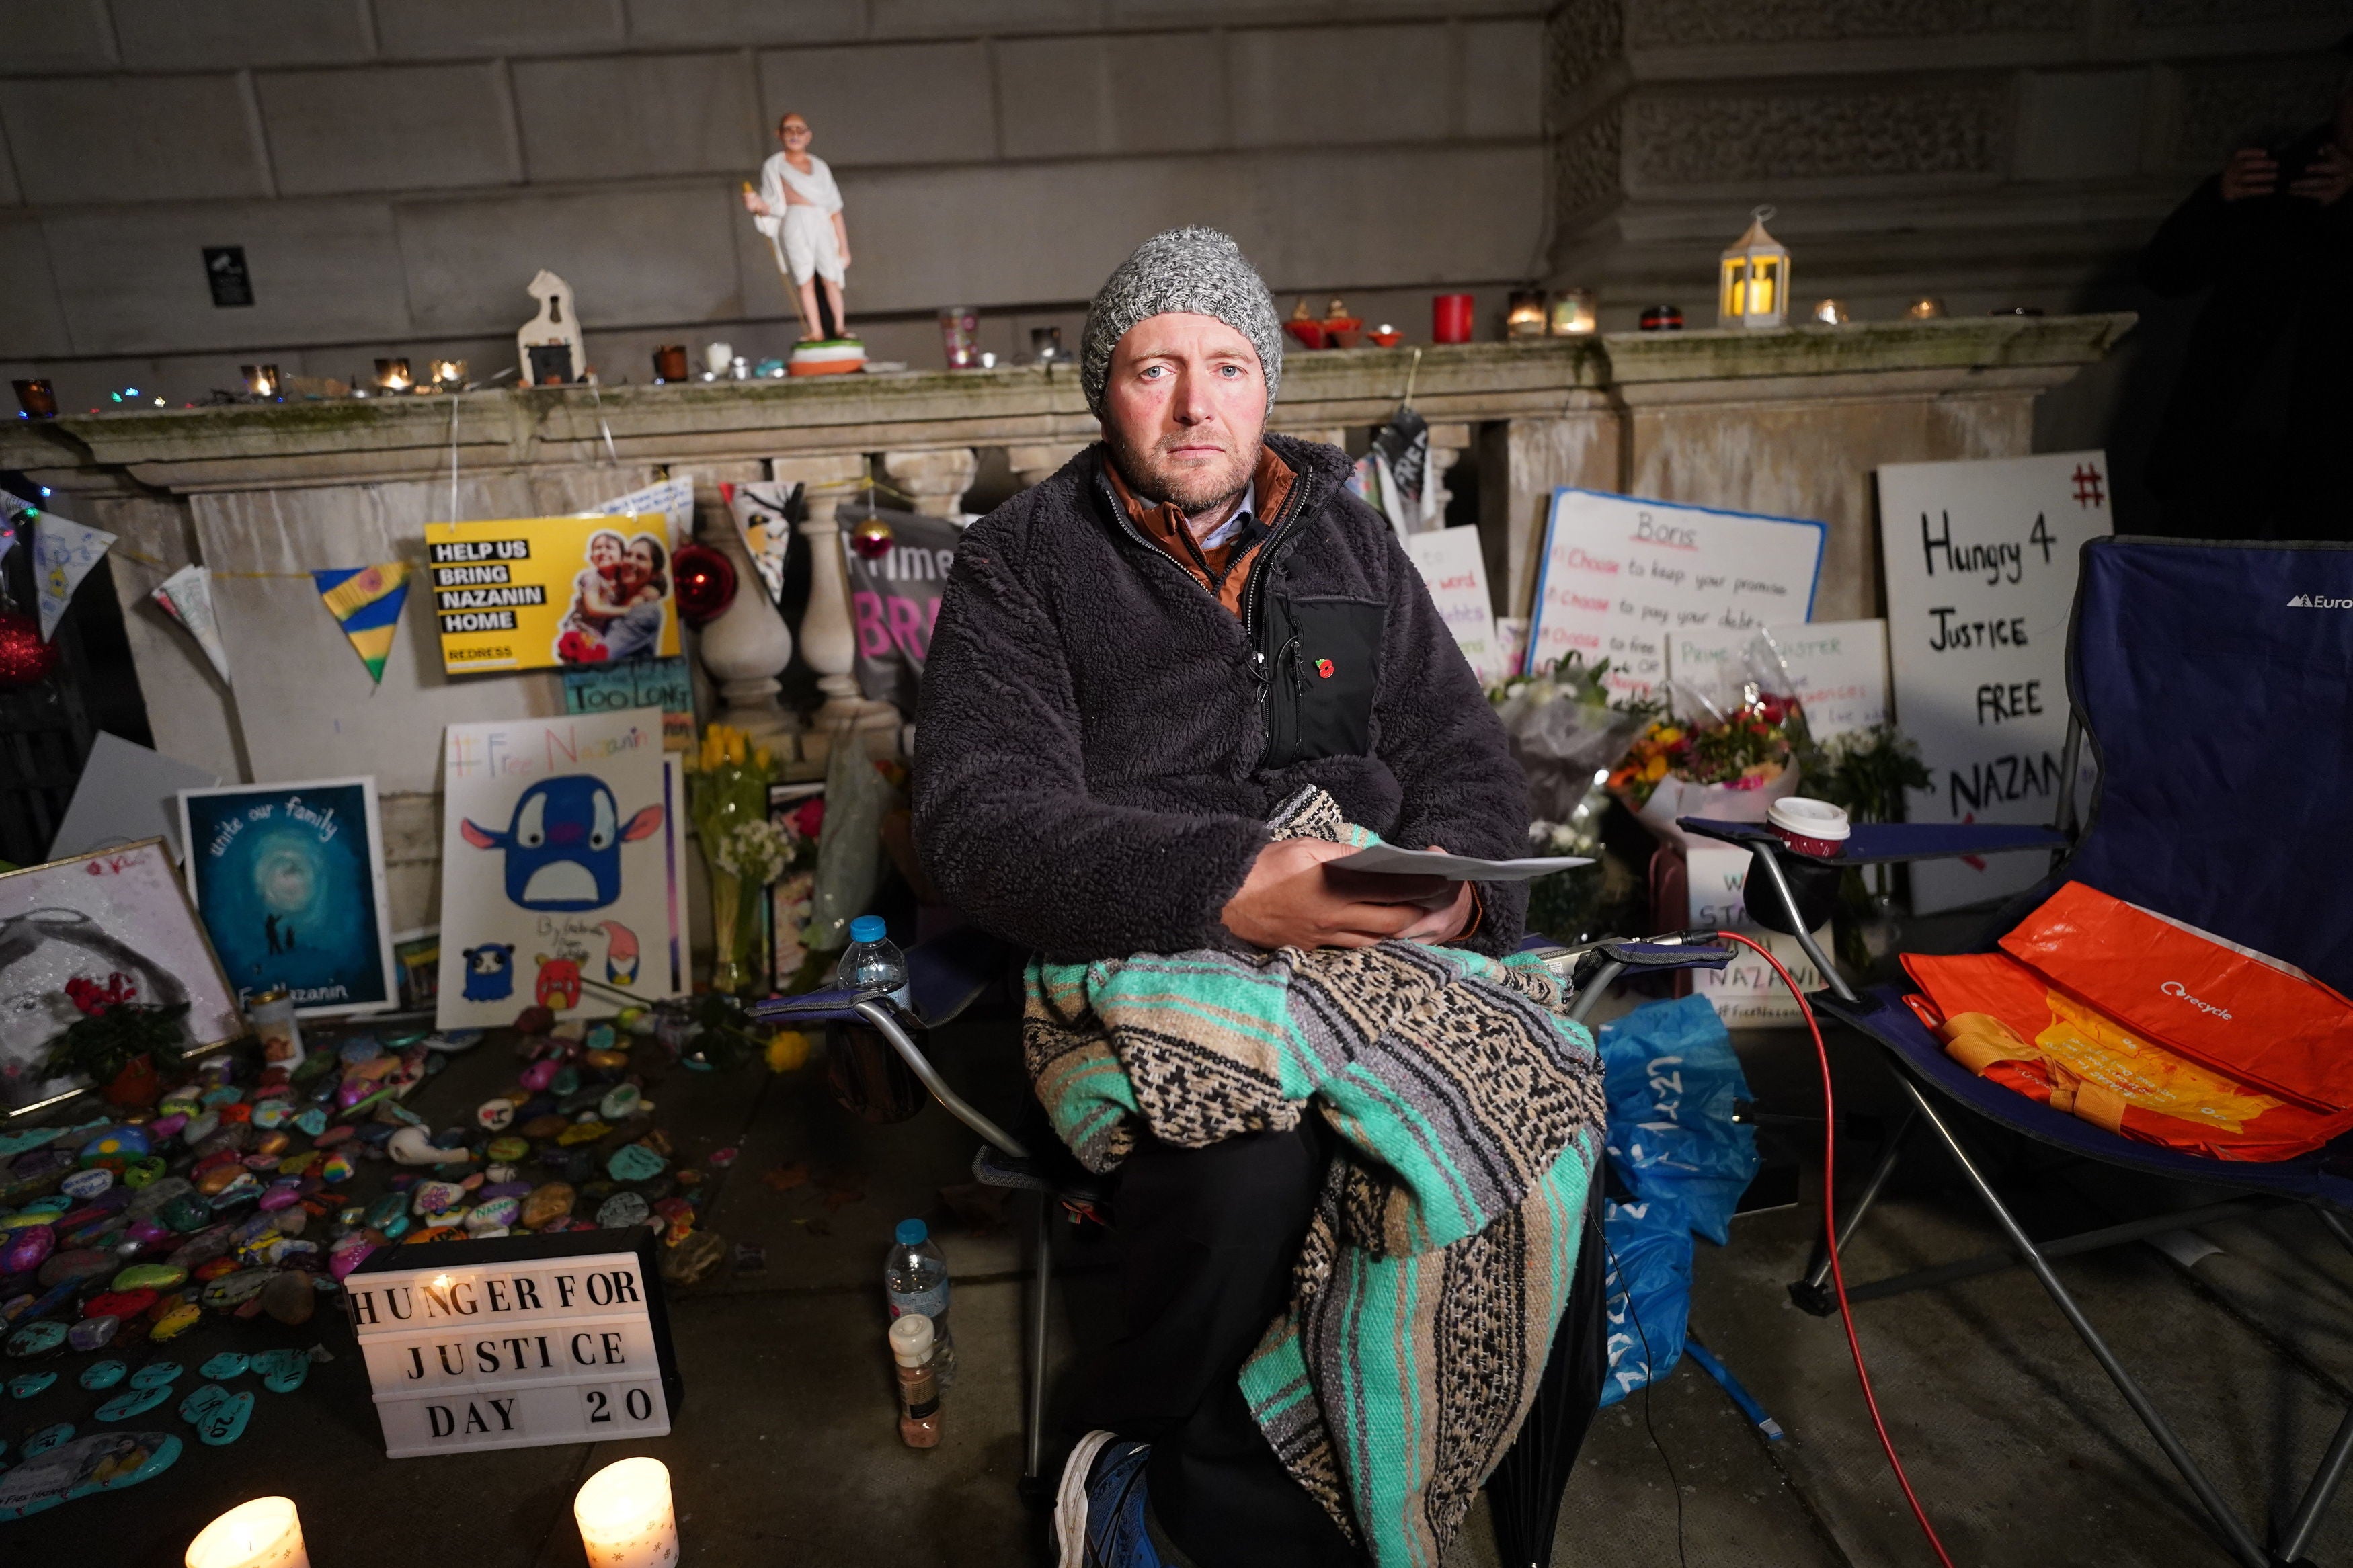 Richard Ratcliffe during his hunger strike outside the Foreign Office in November 2021